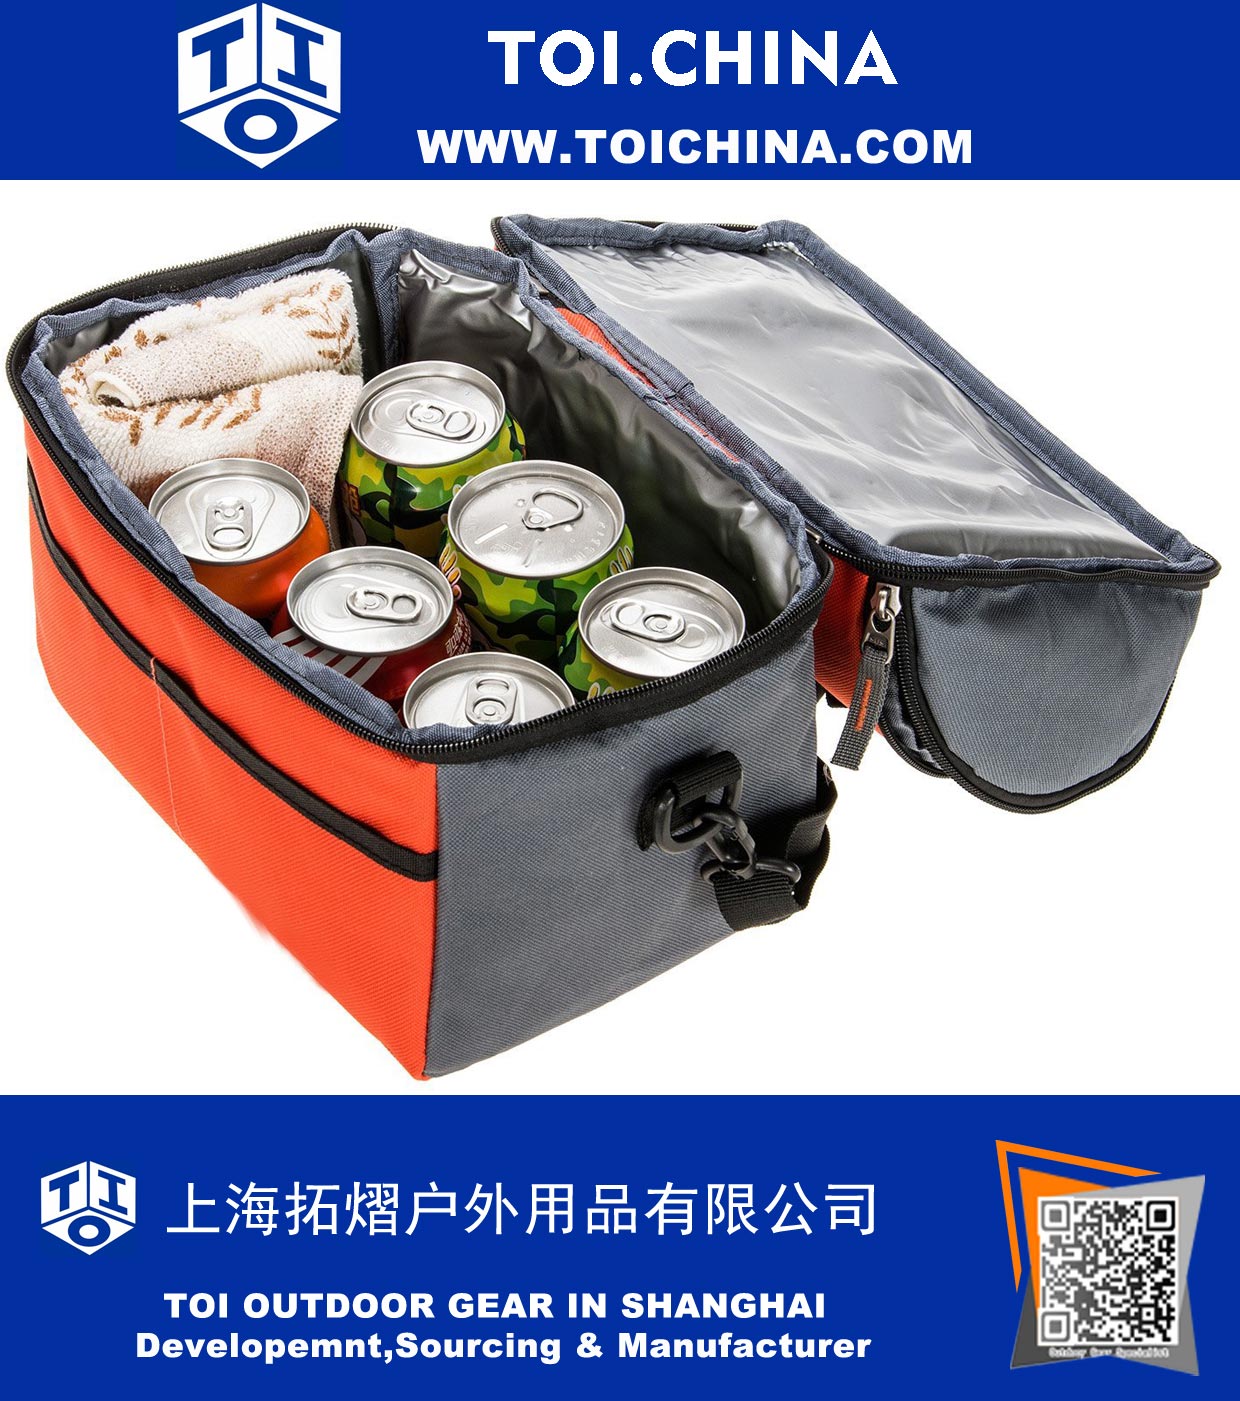 8 Can Cooler Bag Dual Insulated Compartment Lunch Bag High Density Insulation with Strong Leakproof Liners, Many Pockets, Strong Zipper And Stitching